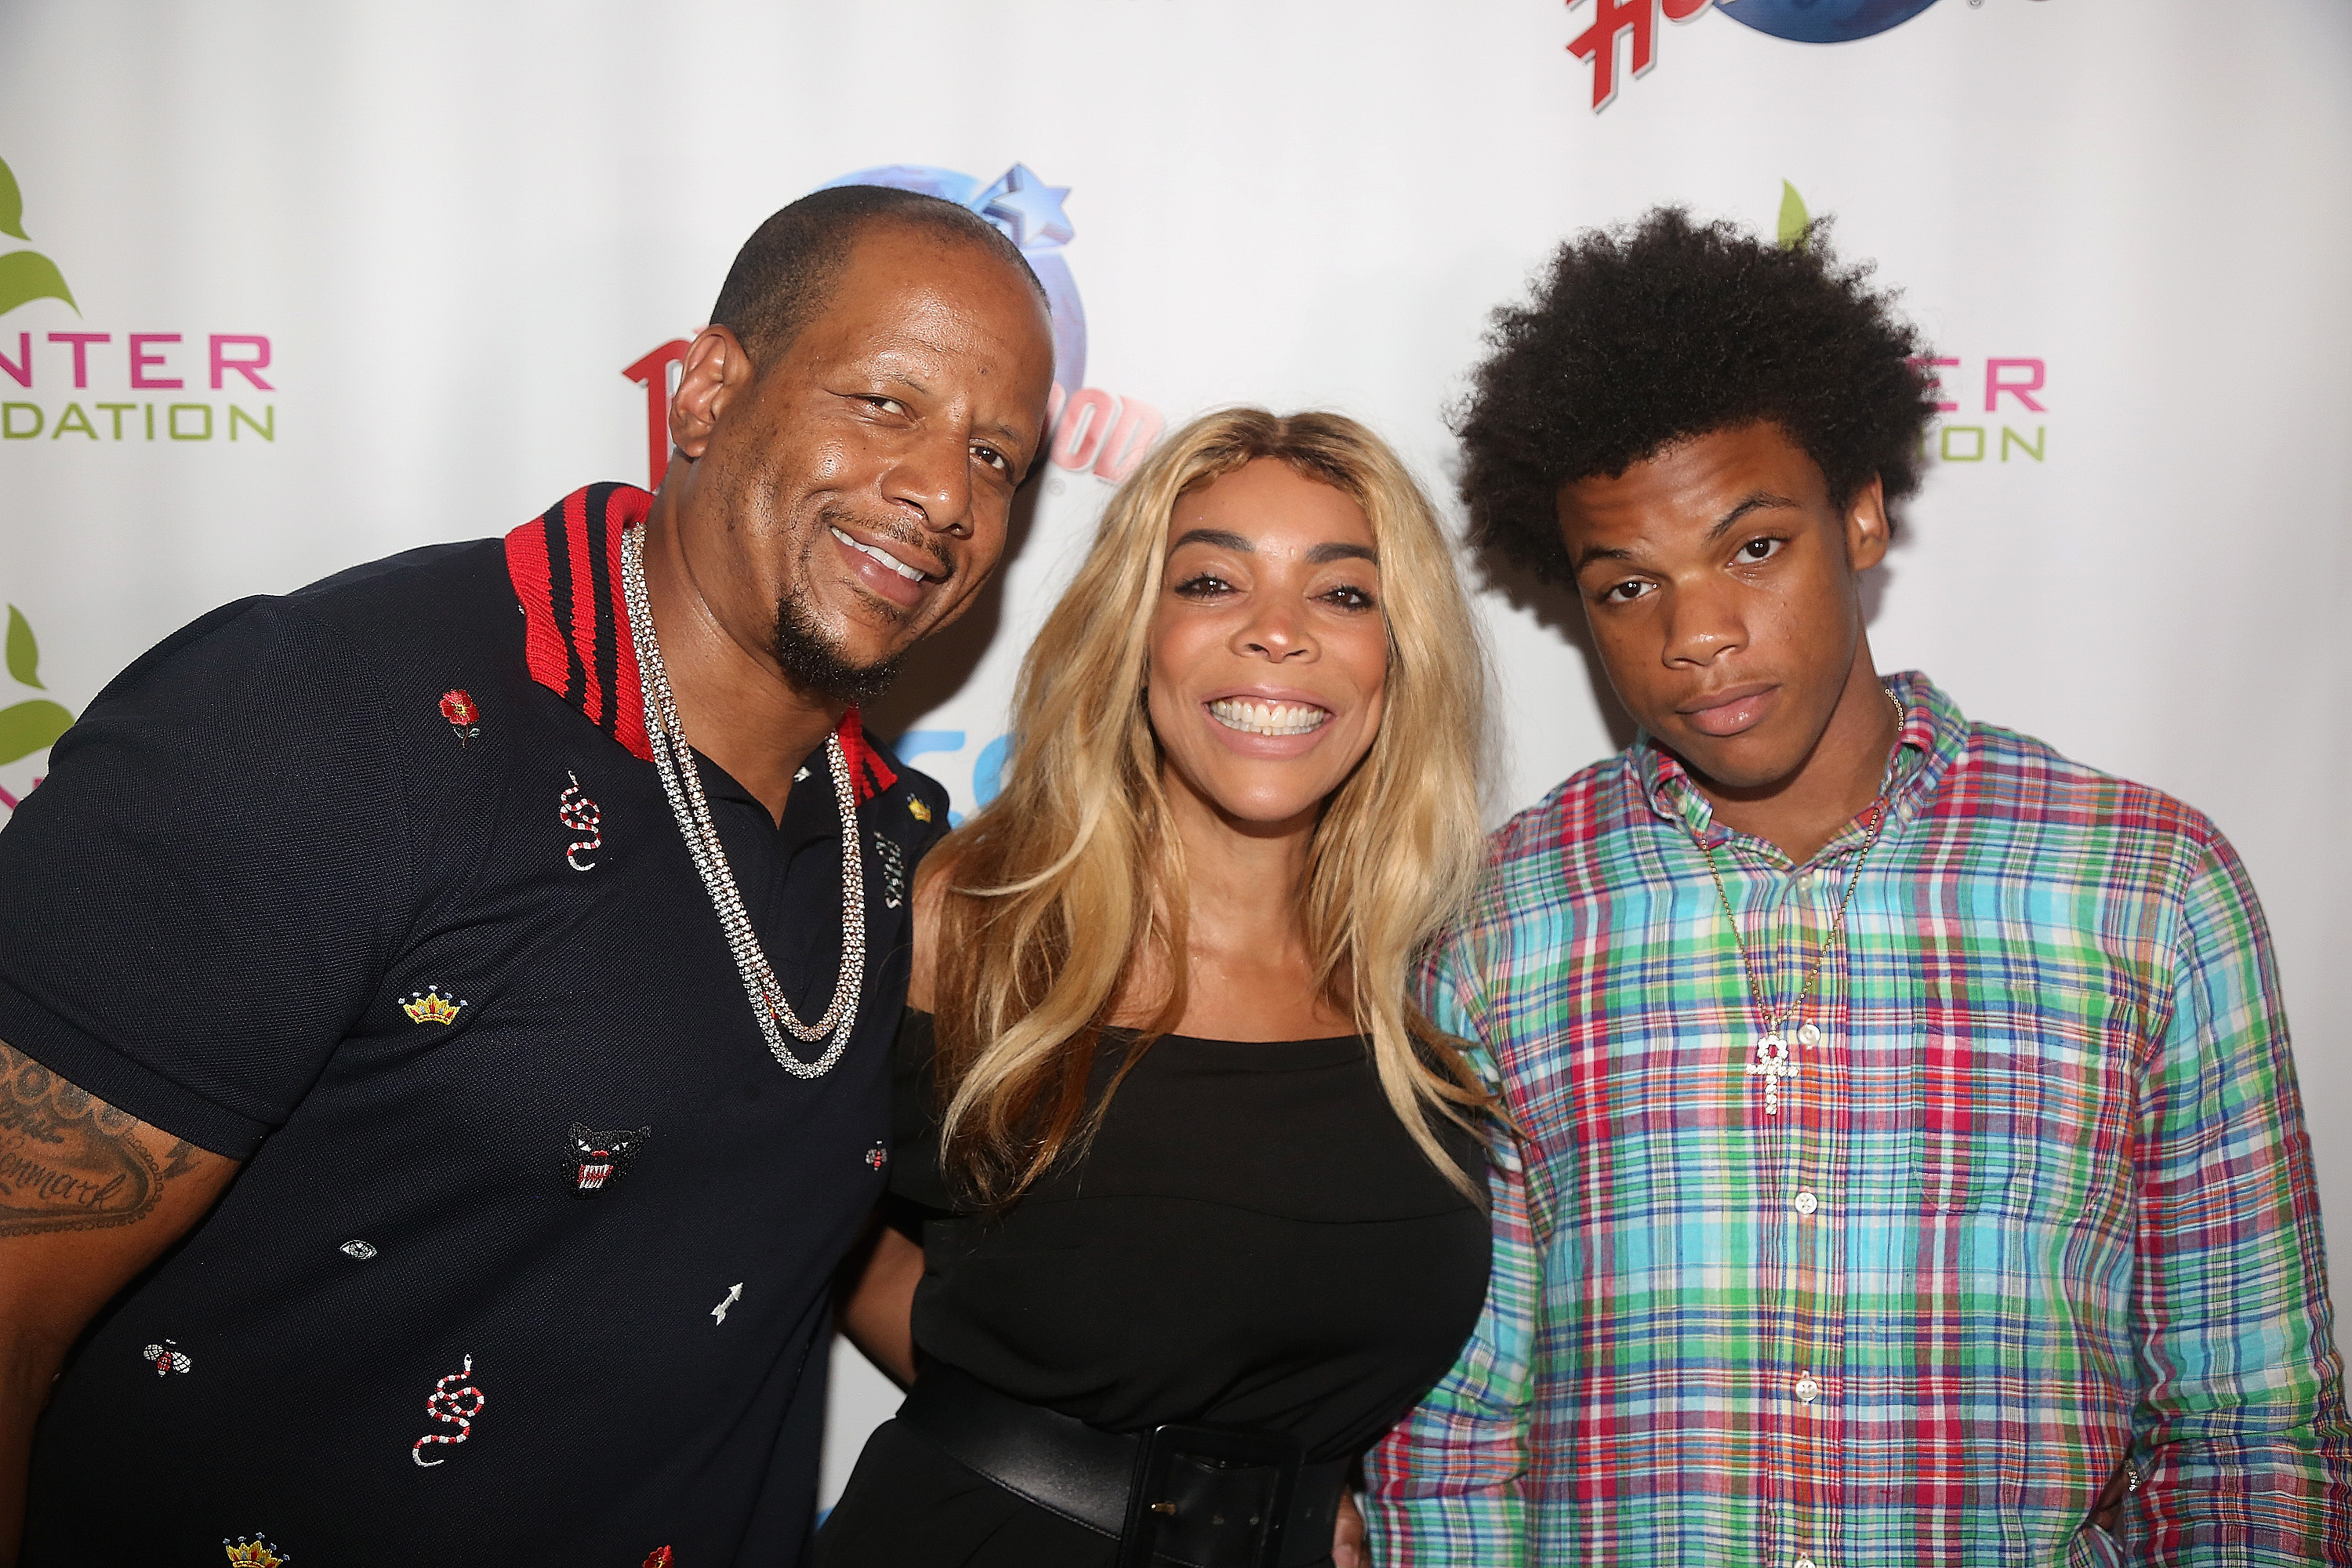 Kevin Hunter, Wendy Williams and Kevin Hunter Jr. at a celebration for The Hunter Foundation Charity on July 11, 2017 in New York City | Source: Getty Images